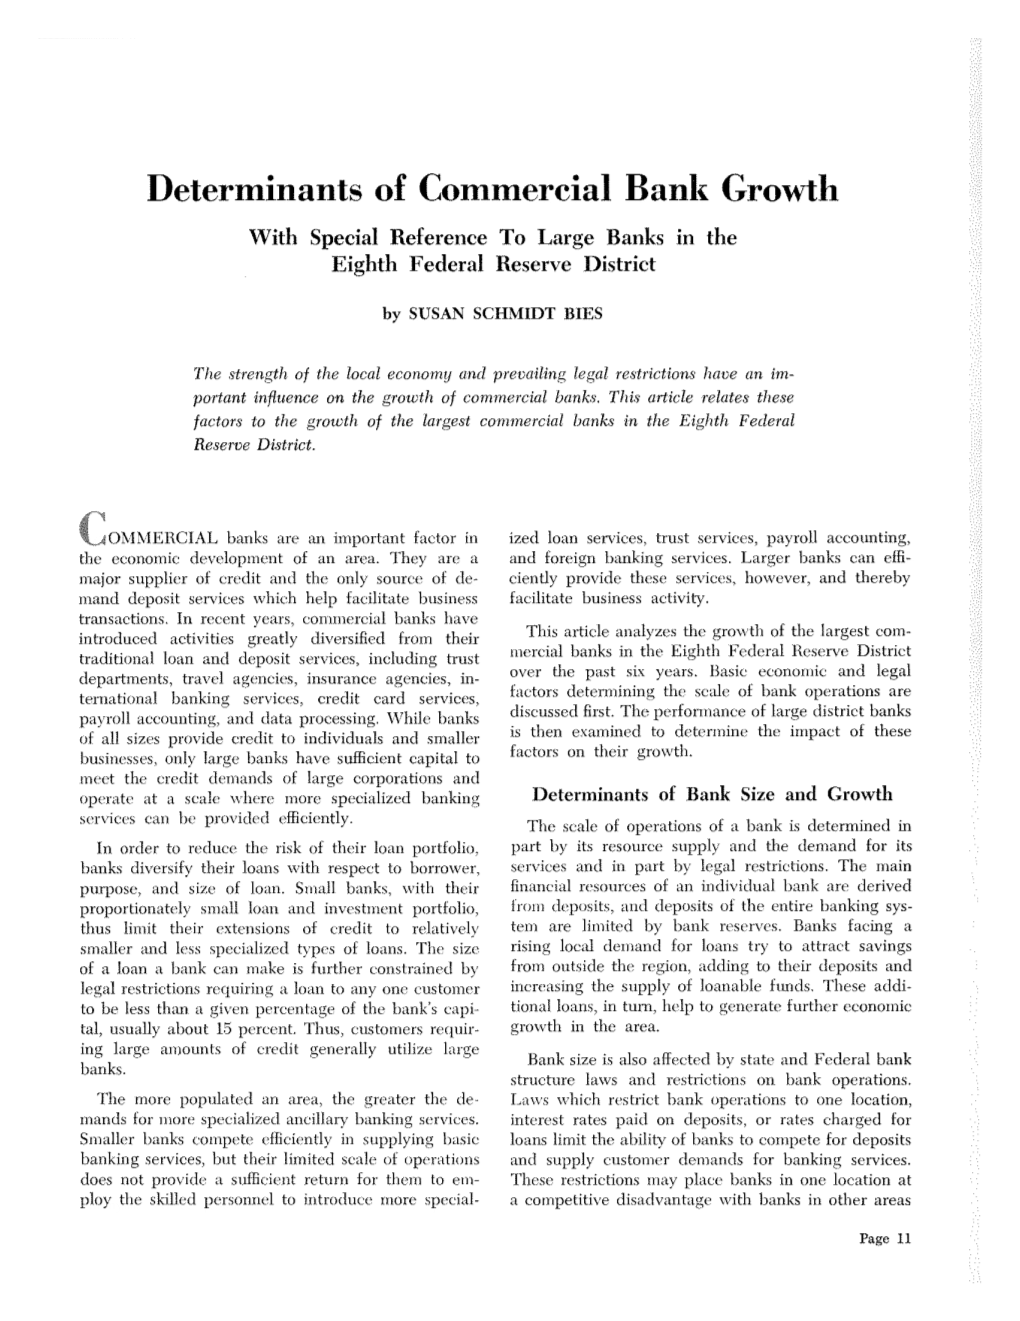 Determinants of Commercial Bank Growth with Special Reference to Large Banks in the Eighth Federal Reserve District